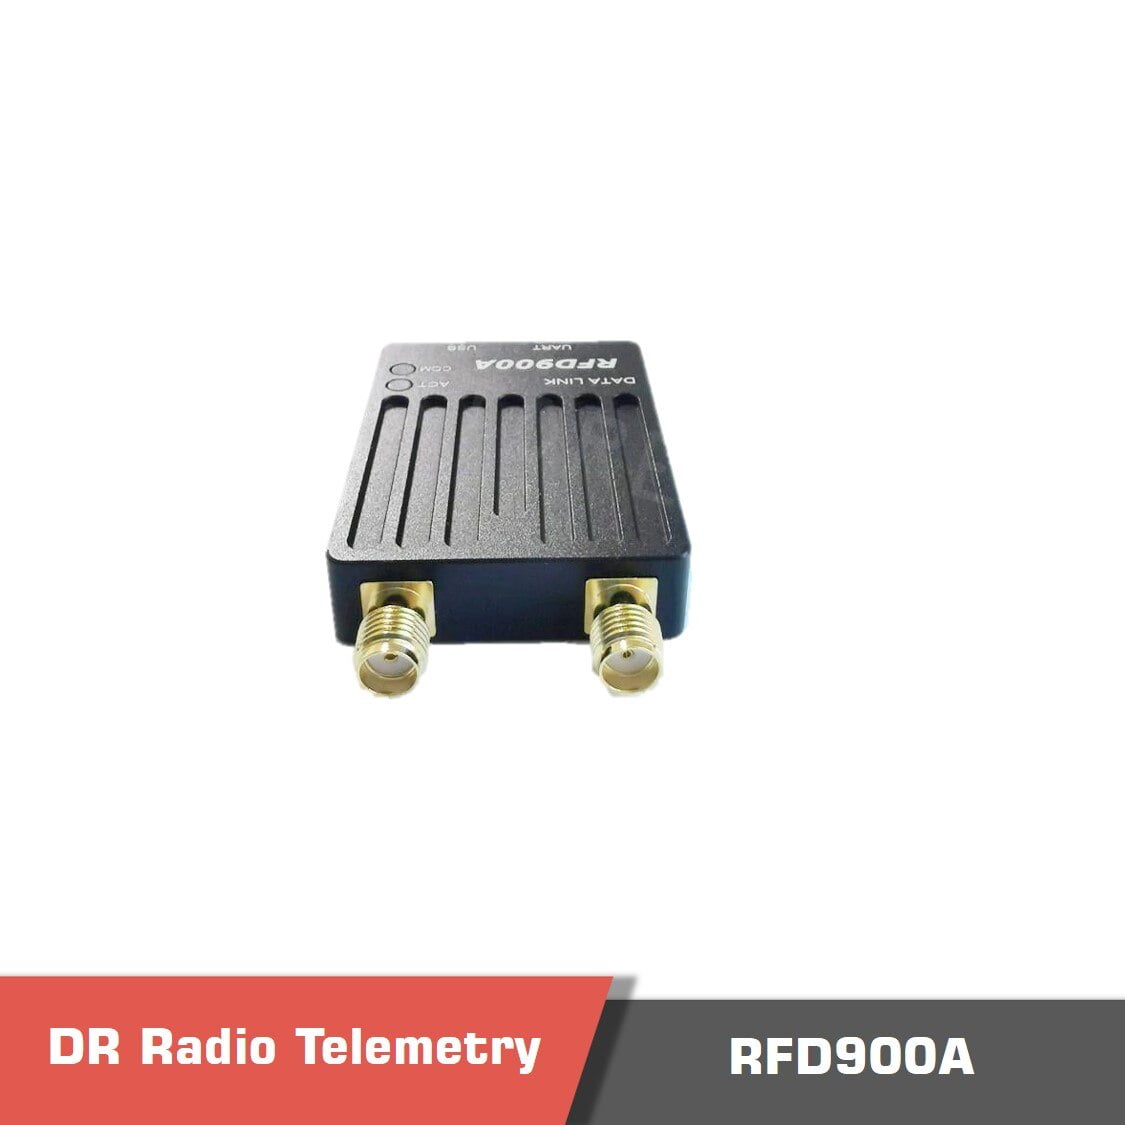 Rfd900a 915mhz 3dr radio telemetry motionew